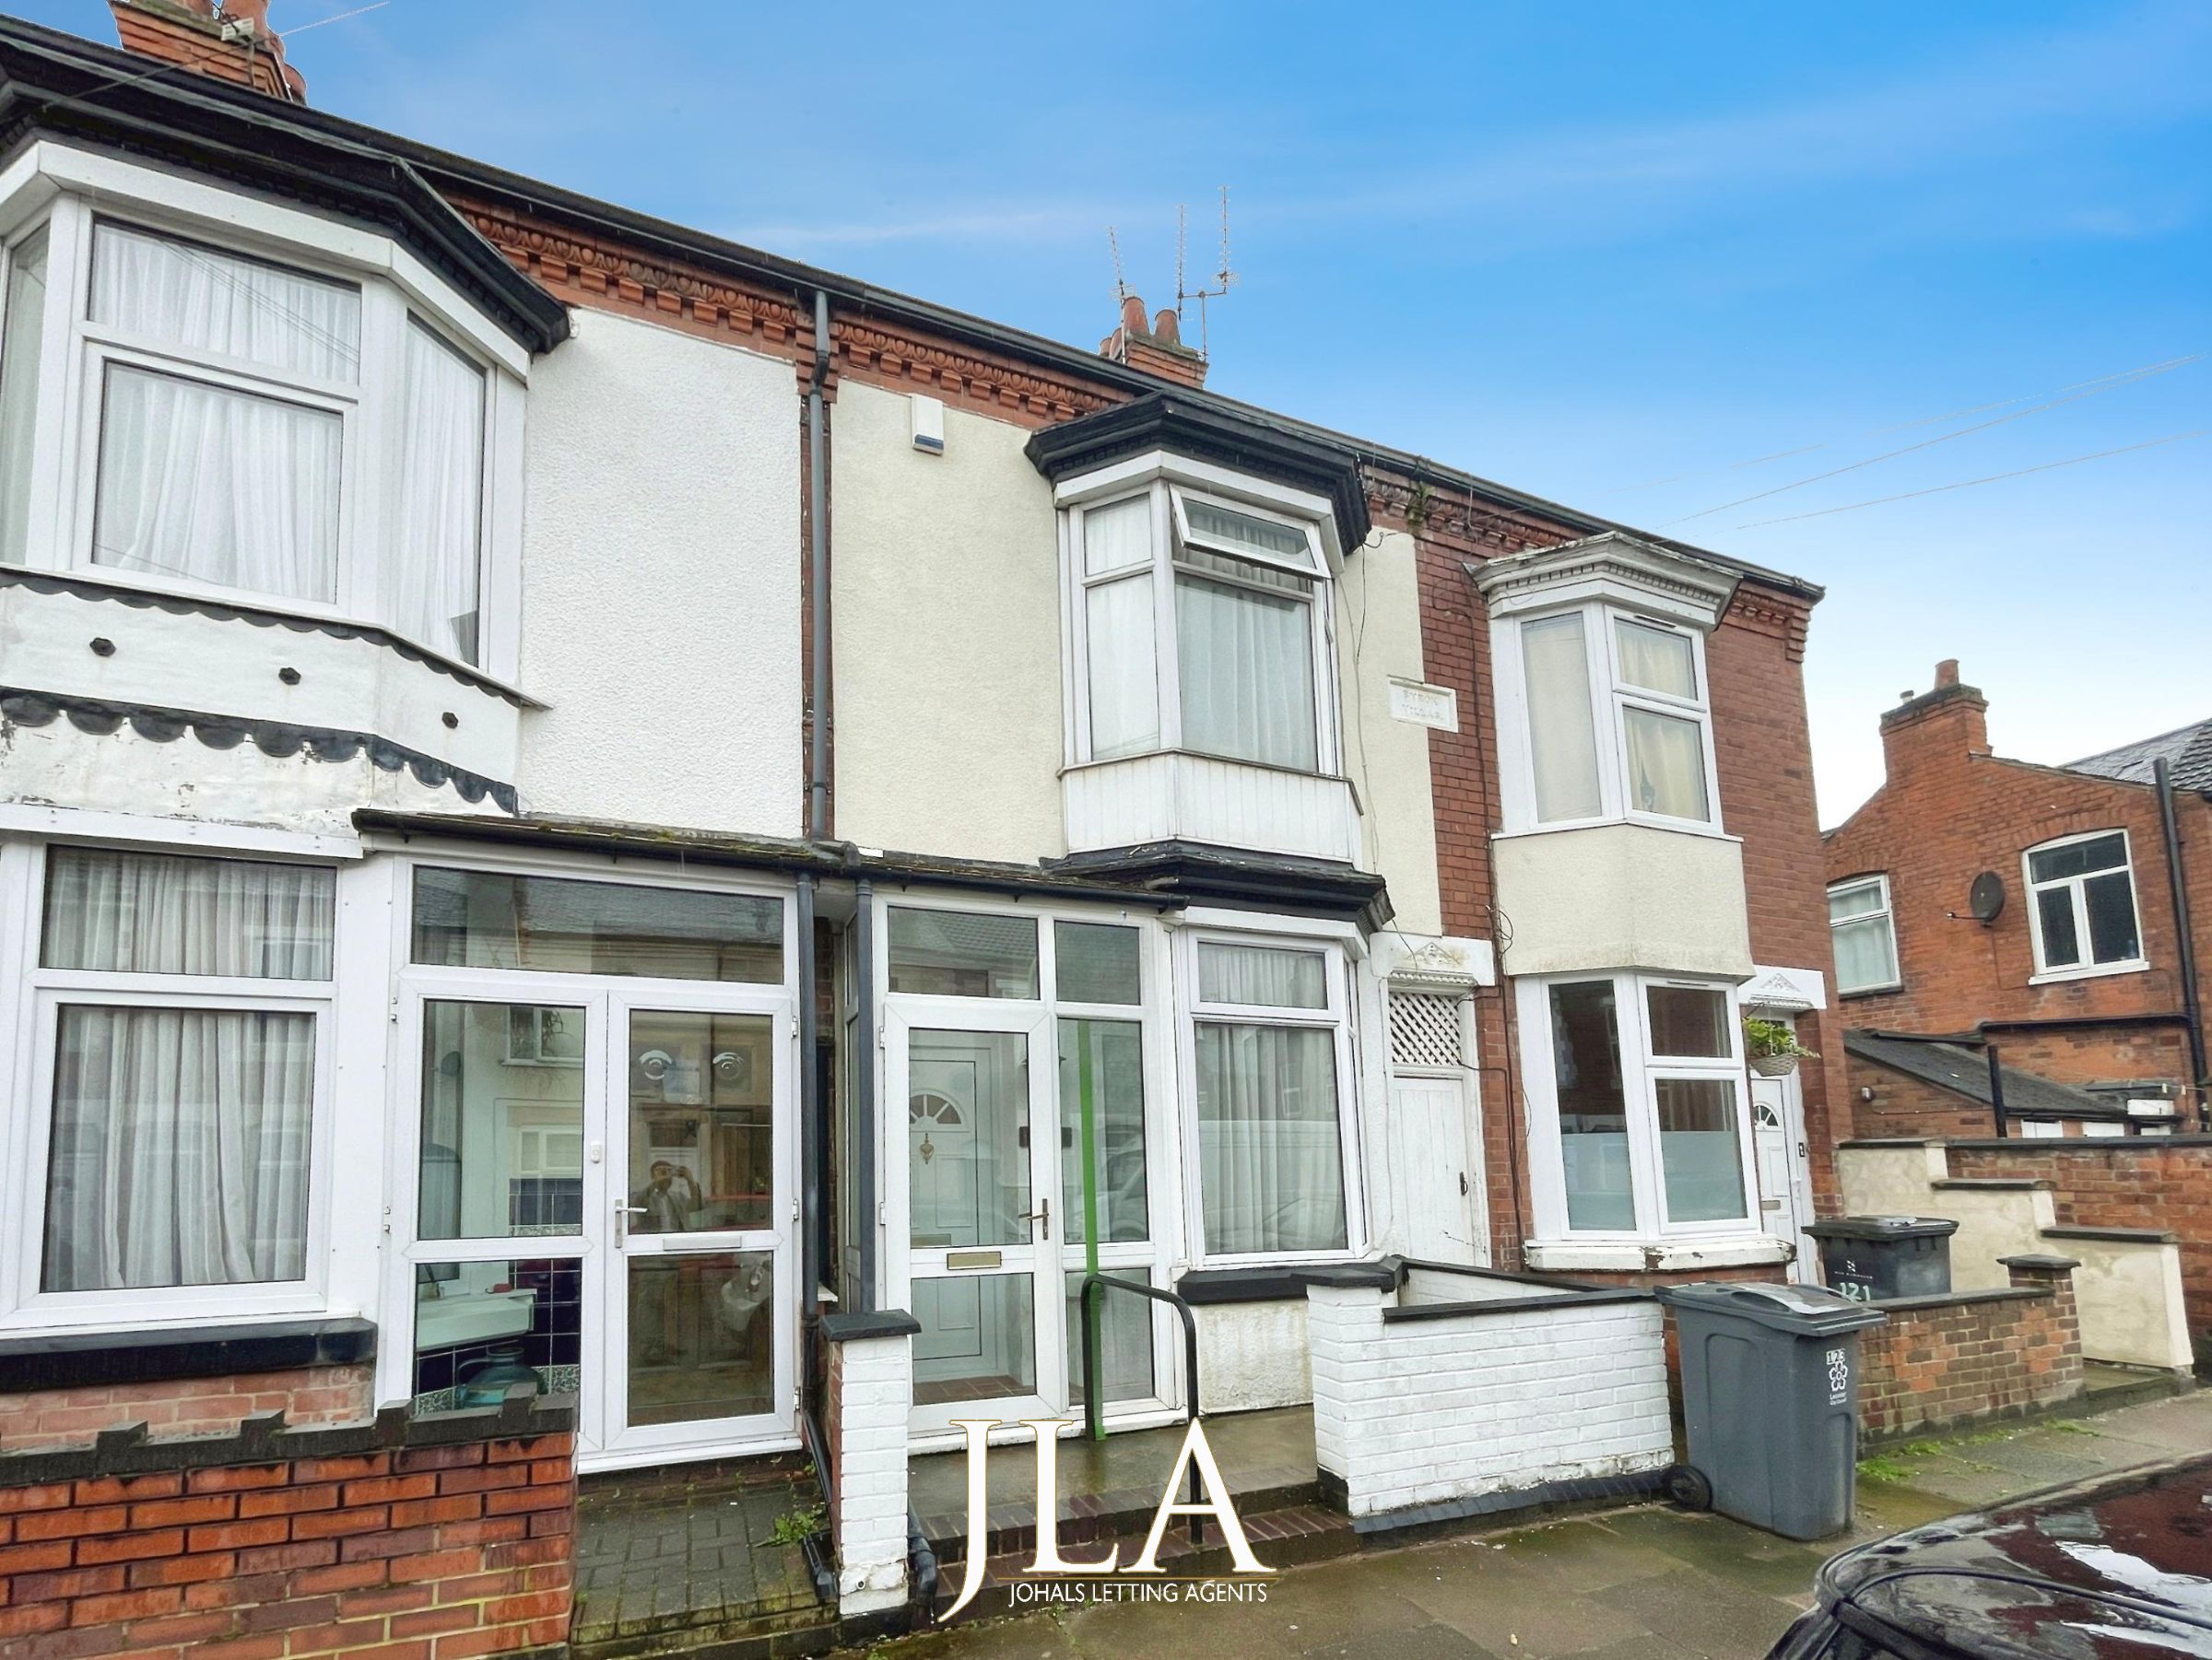 3 bed terraced house to rent in Wolverton Road, Leicester, LE3 